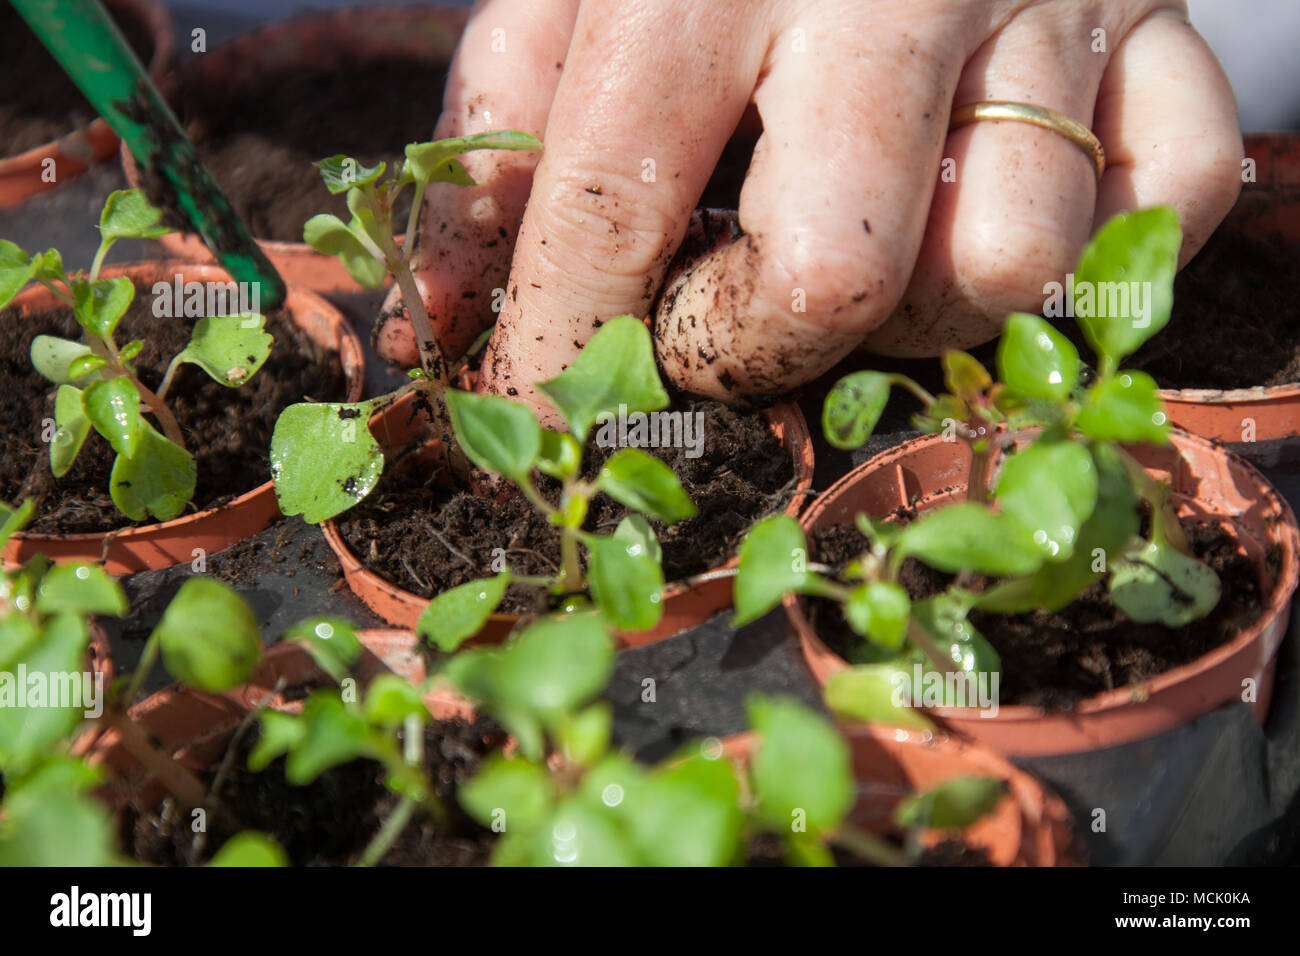 Picturesque close up view of a gardener potting on a plug plant. The plants in the image are Busy Lizzie Jigsaw. Stock Photo